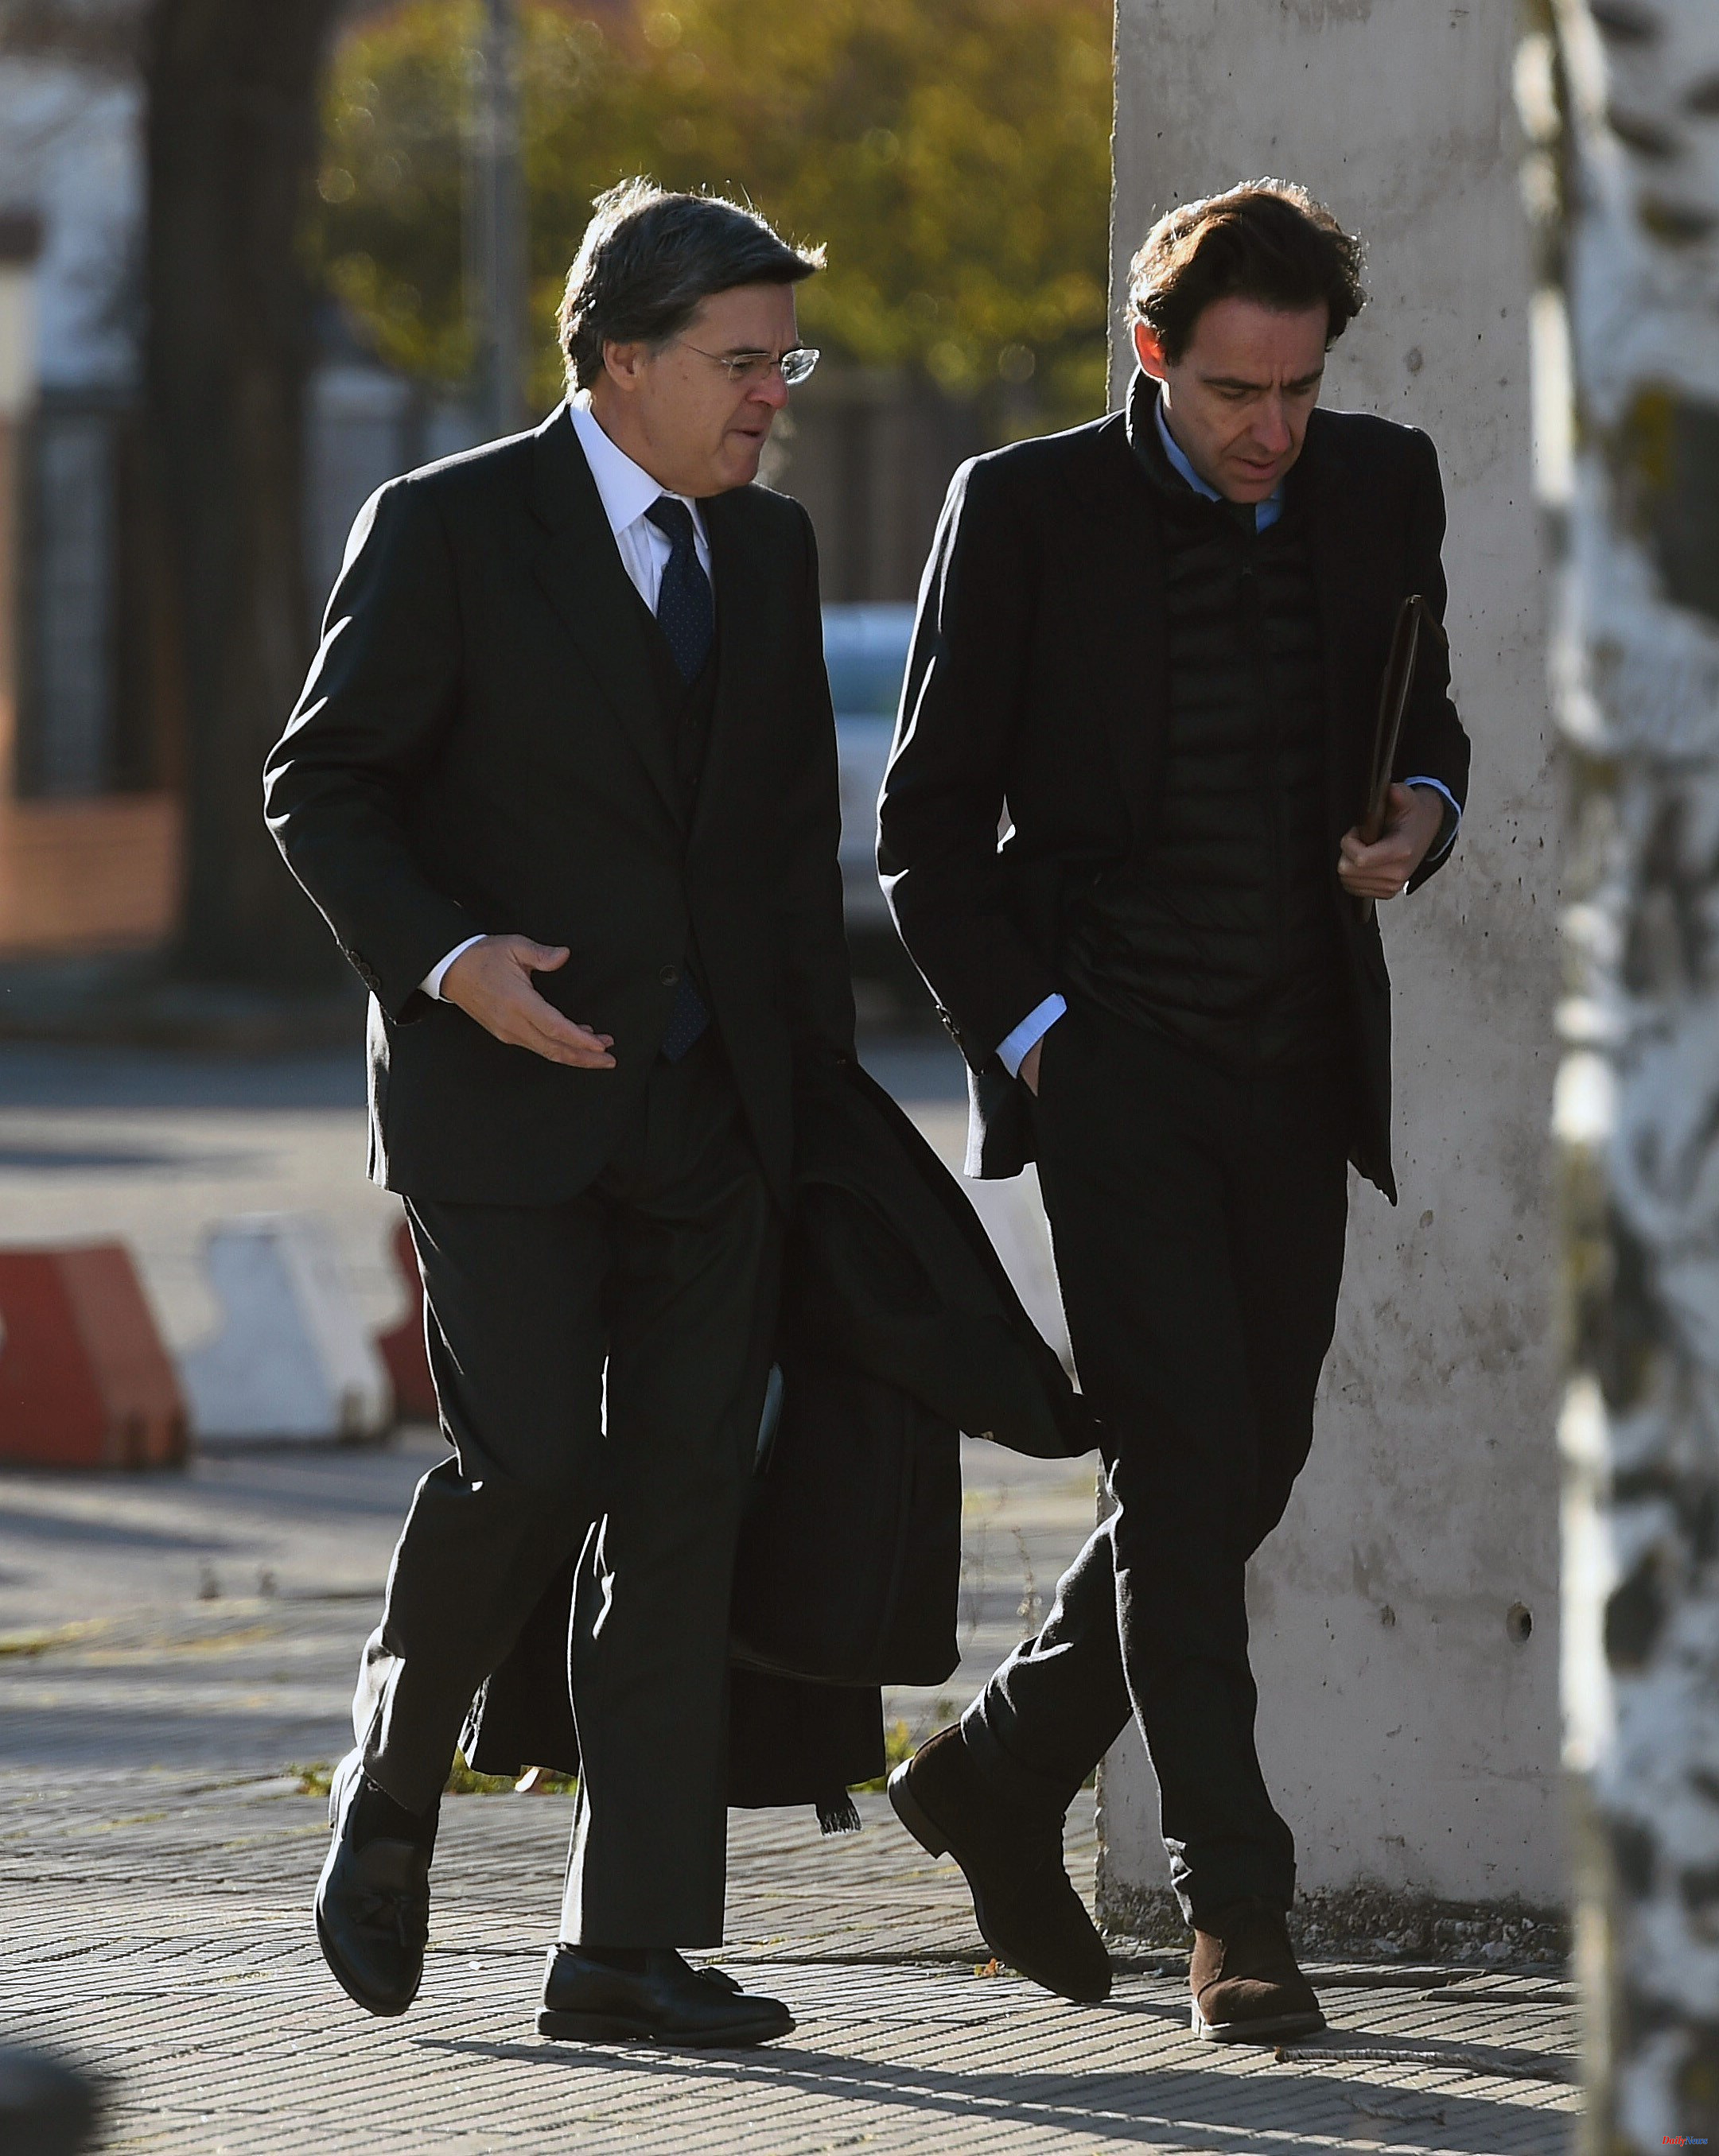 Courts López Madrid is on trial for hiring Villarejo to harass Dr. Pinto